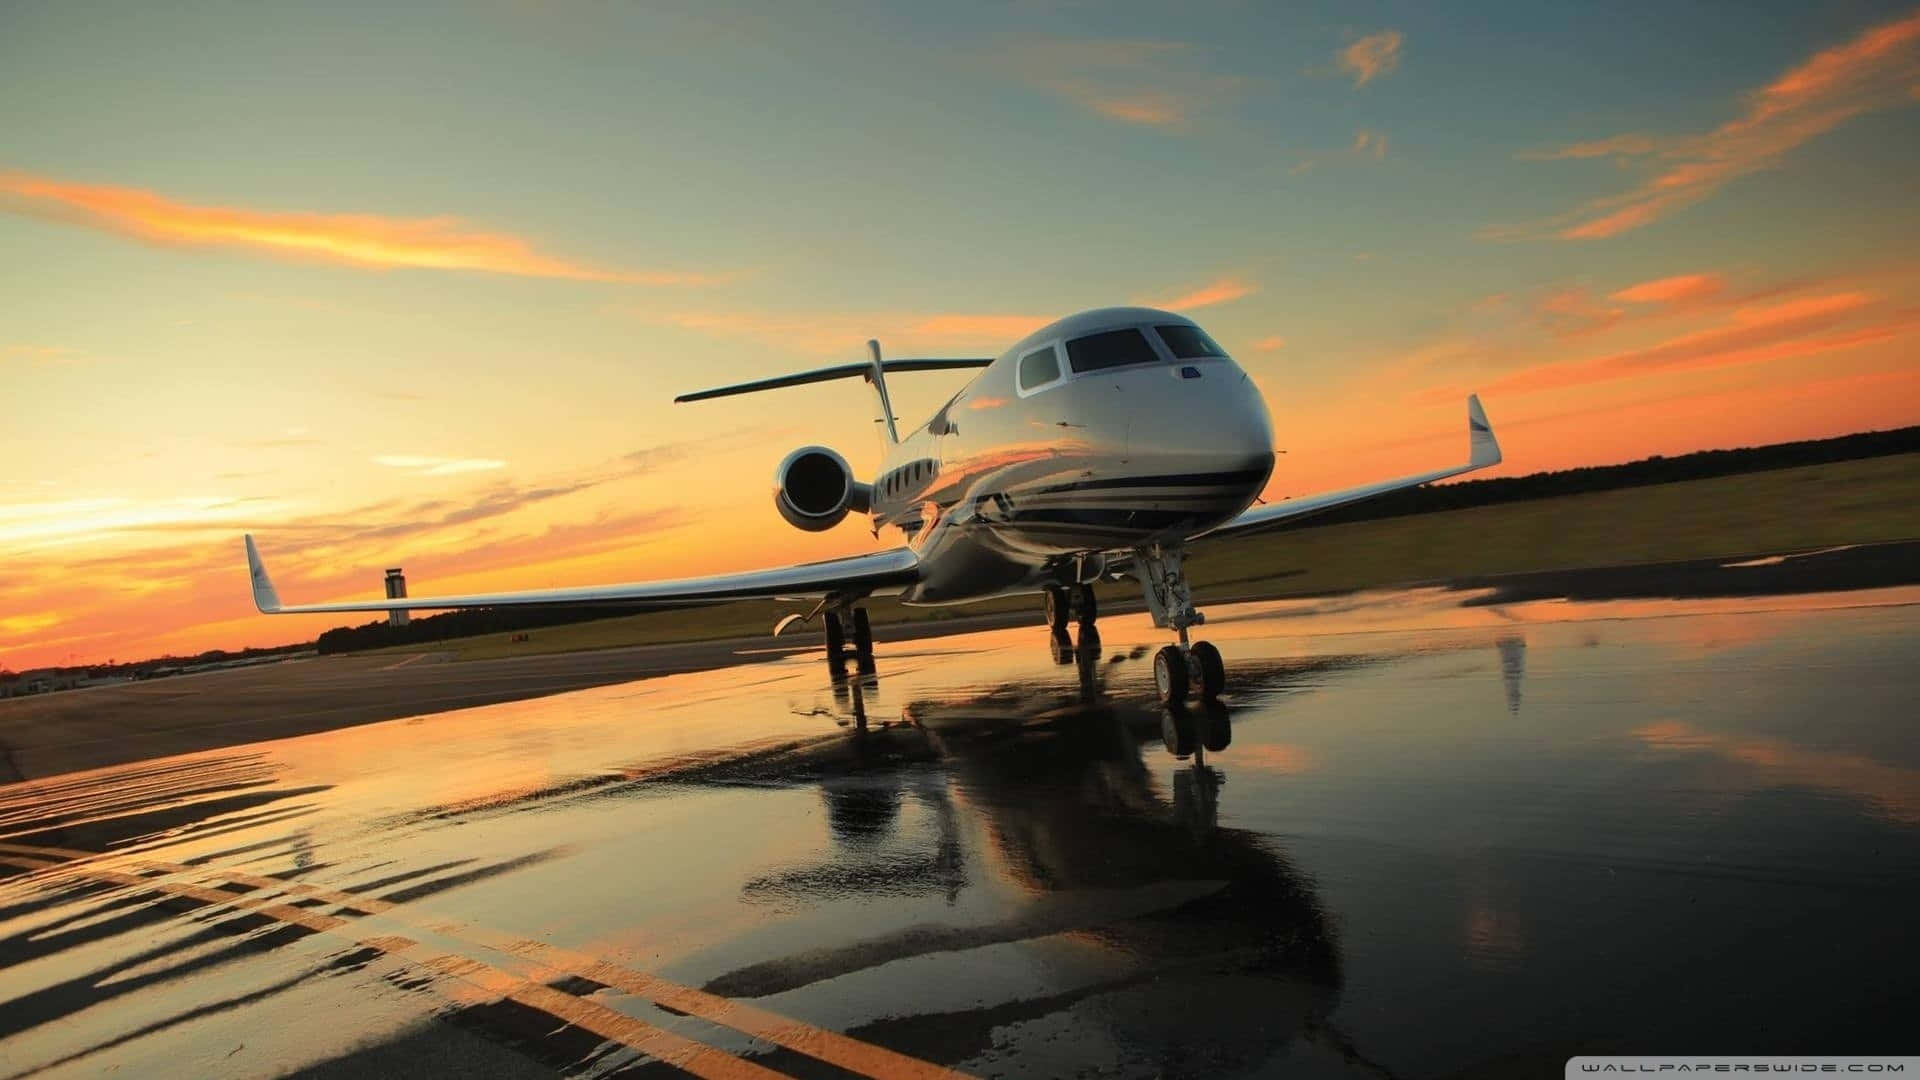 A Private Jet Sitting On The Runway At Sunset Wallpaper